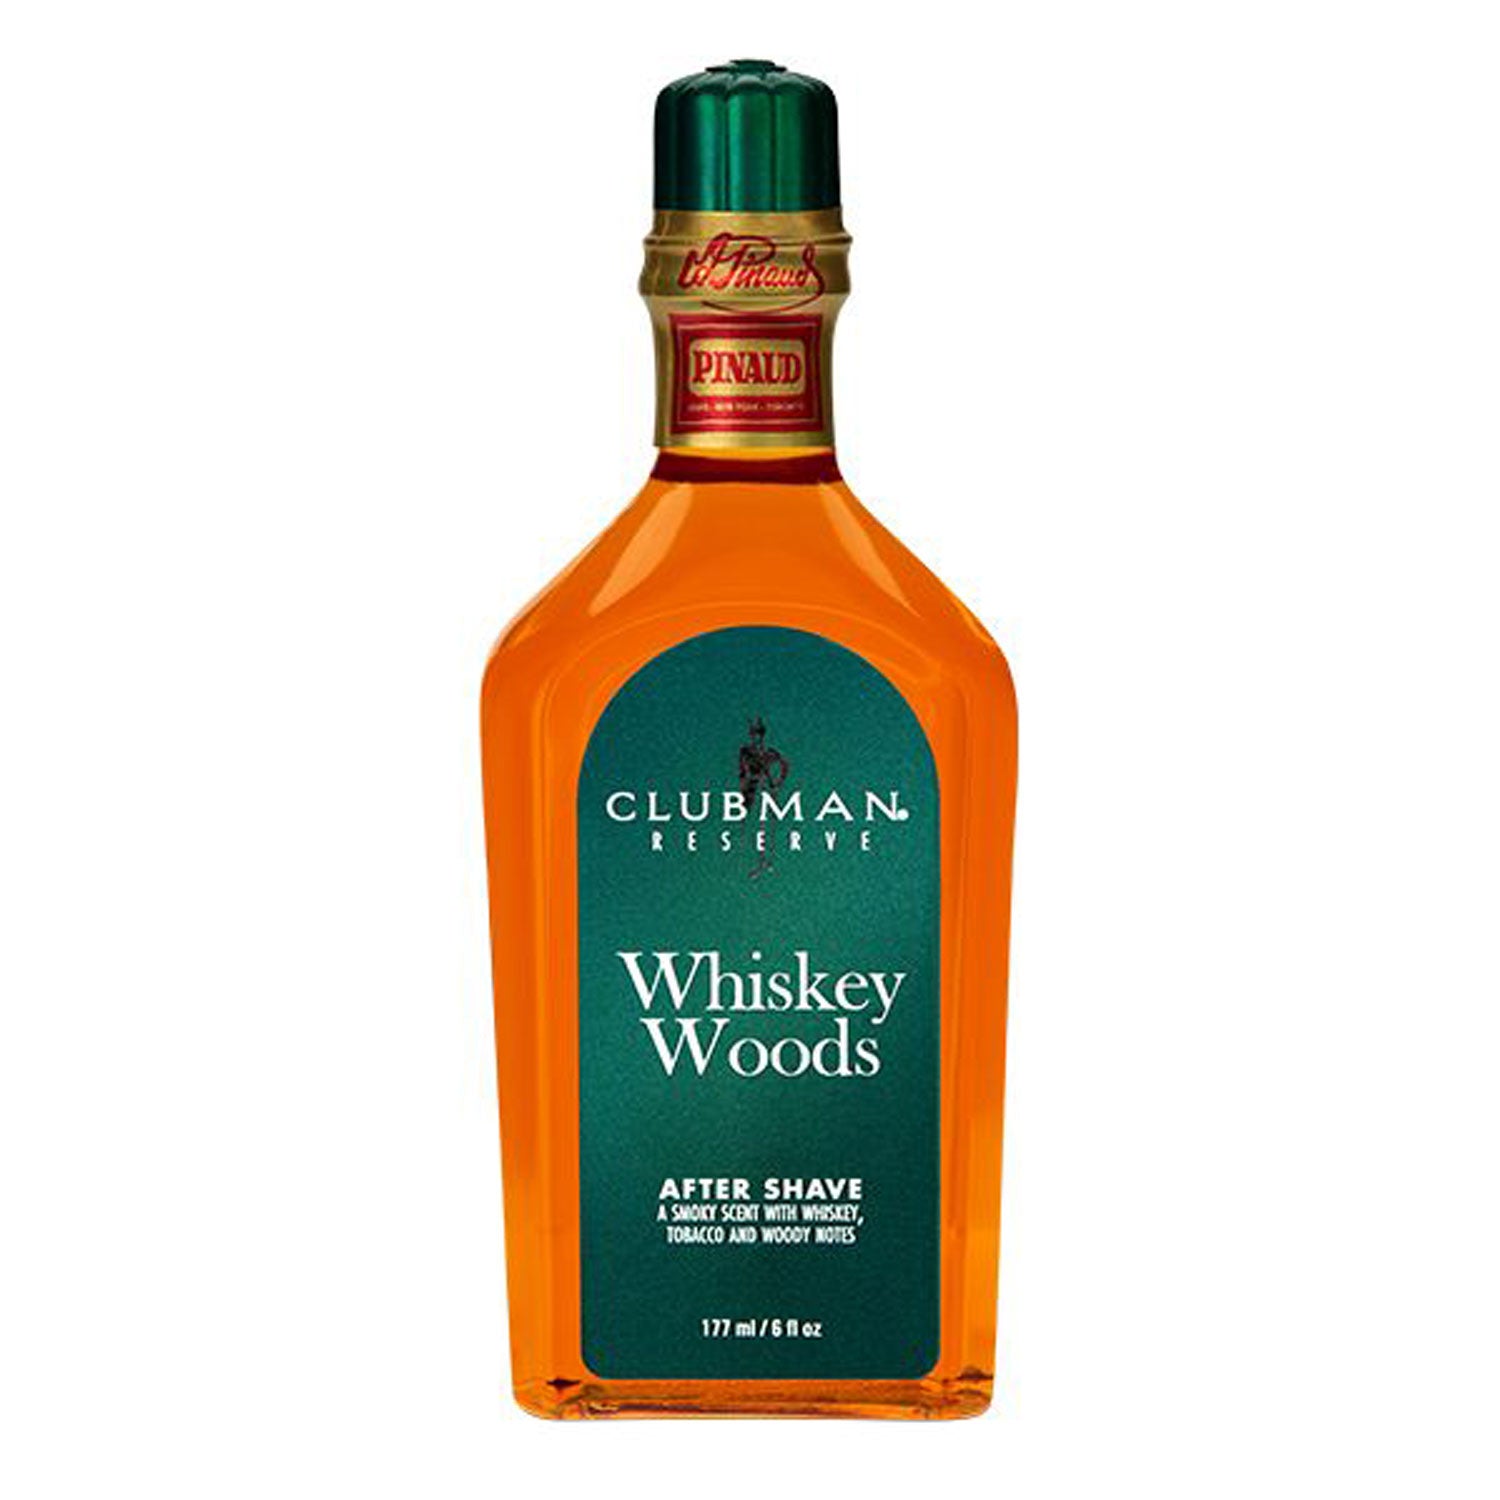 Clubman Whiskey Woods After Shave 177ml - Orcadia